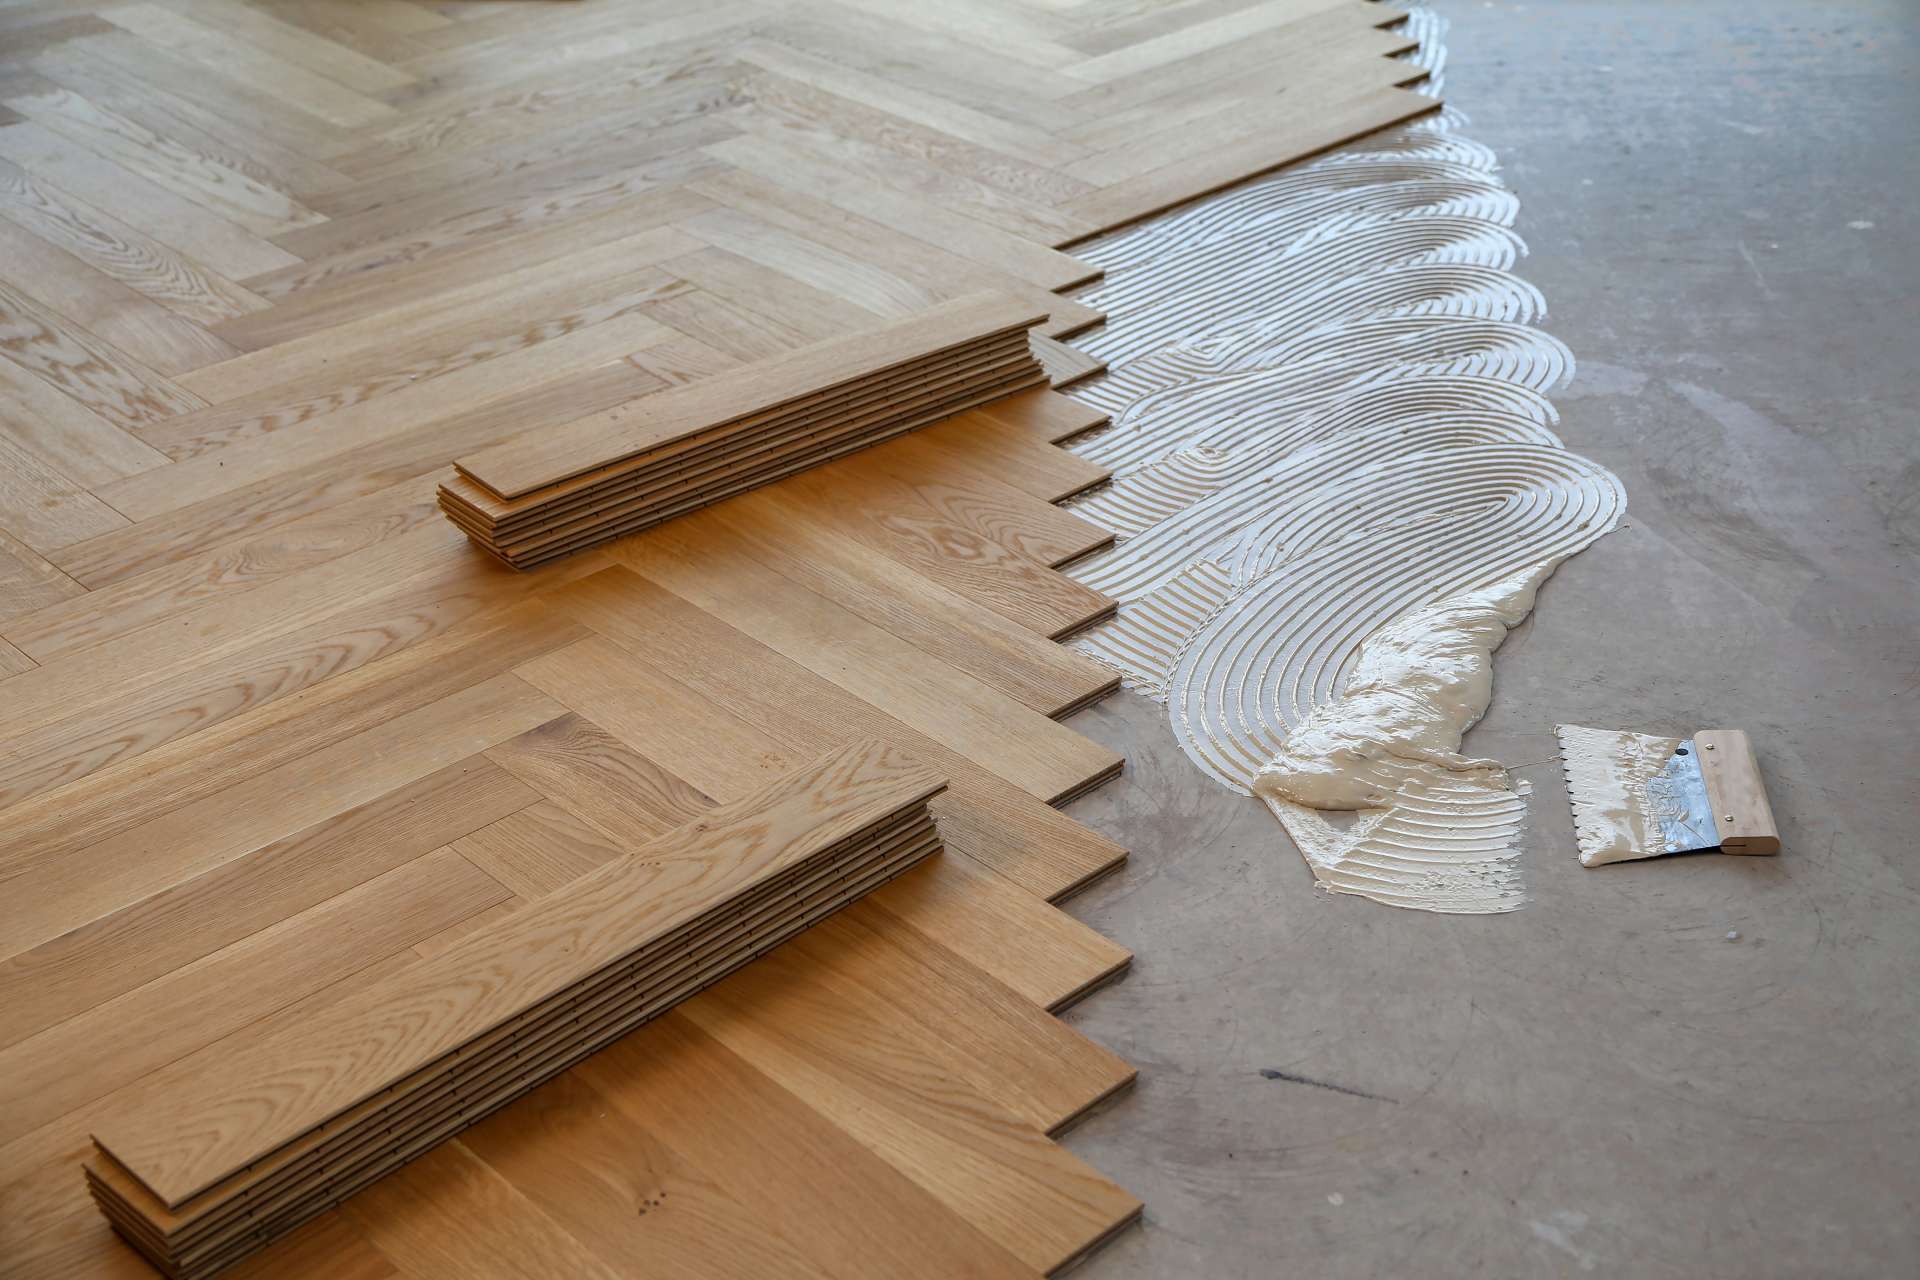 Flooring Installation - Step Up Your Knowledge